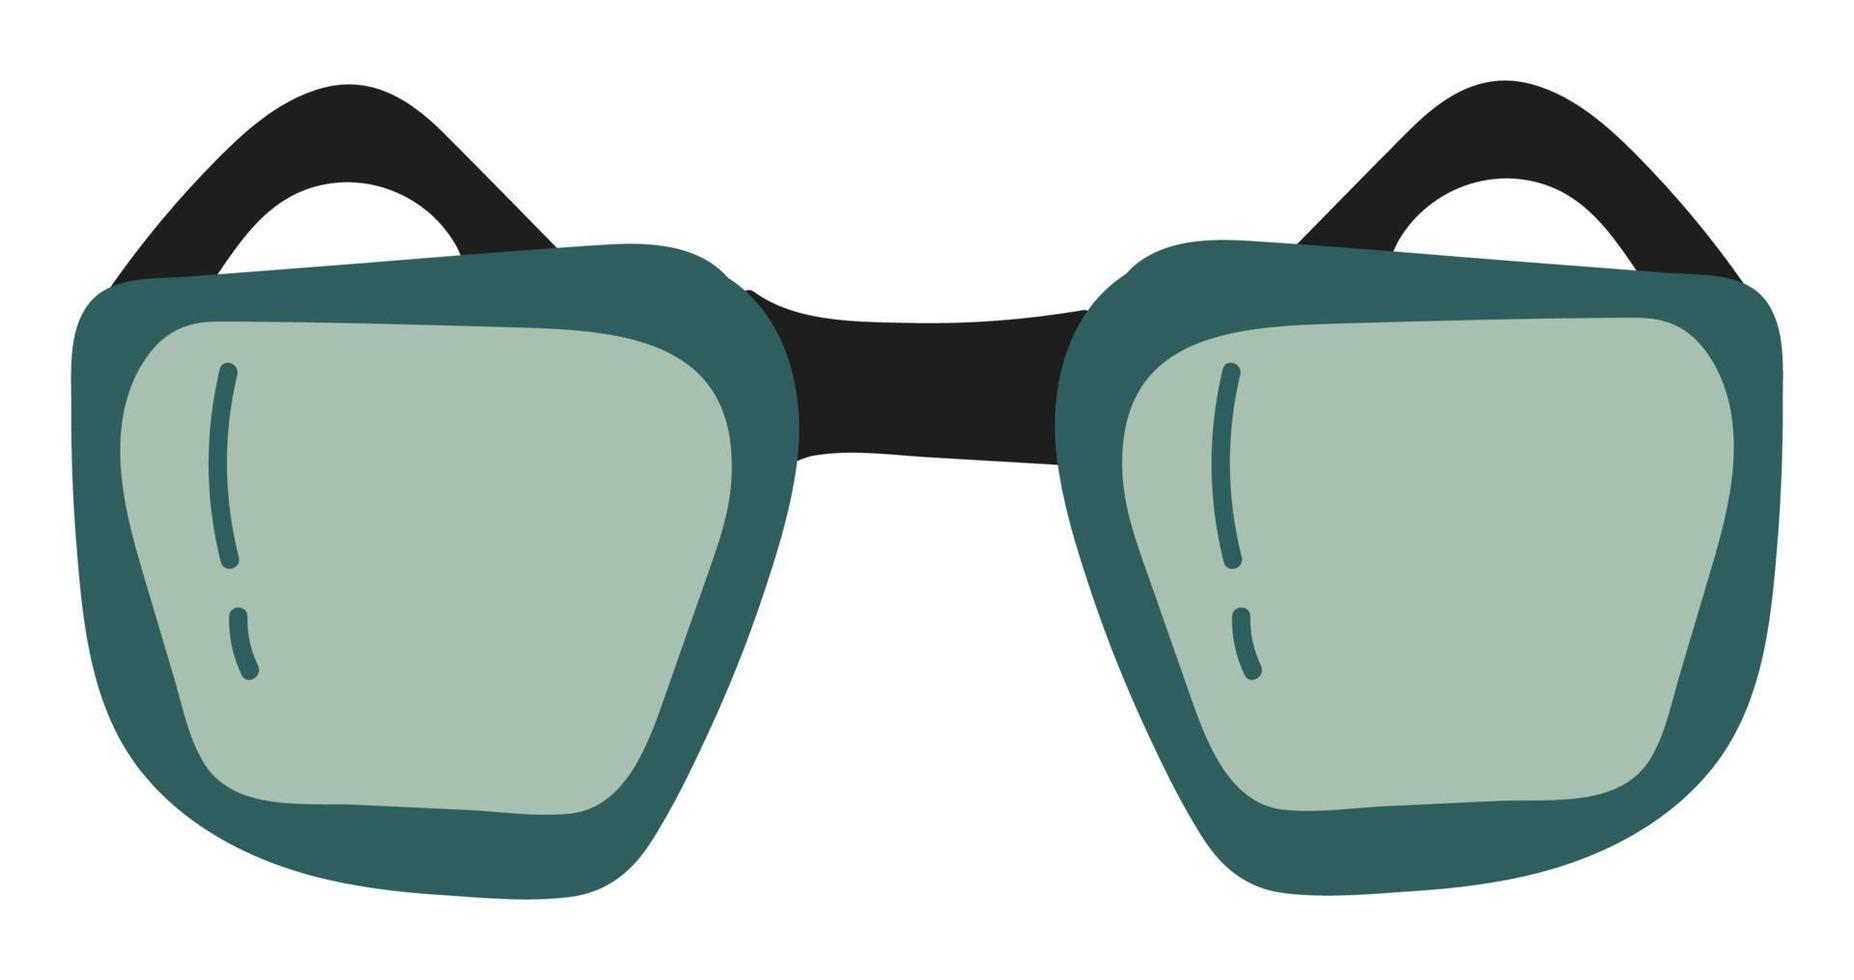 Cute hand drawn glasses. White background, isolate. Vector illustration.